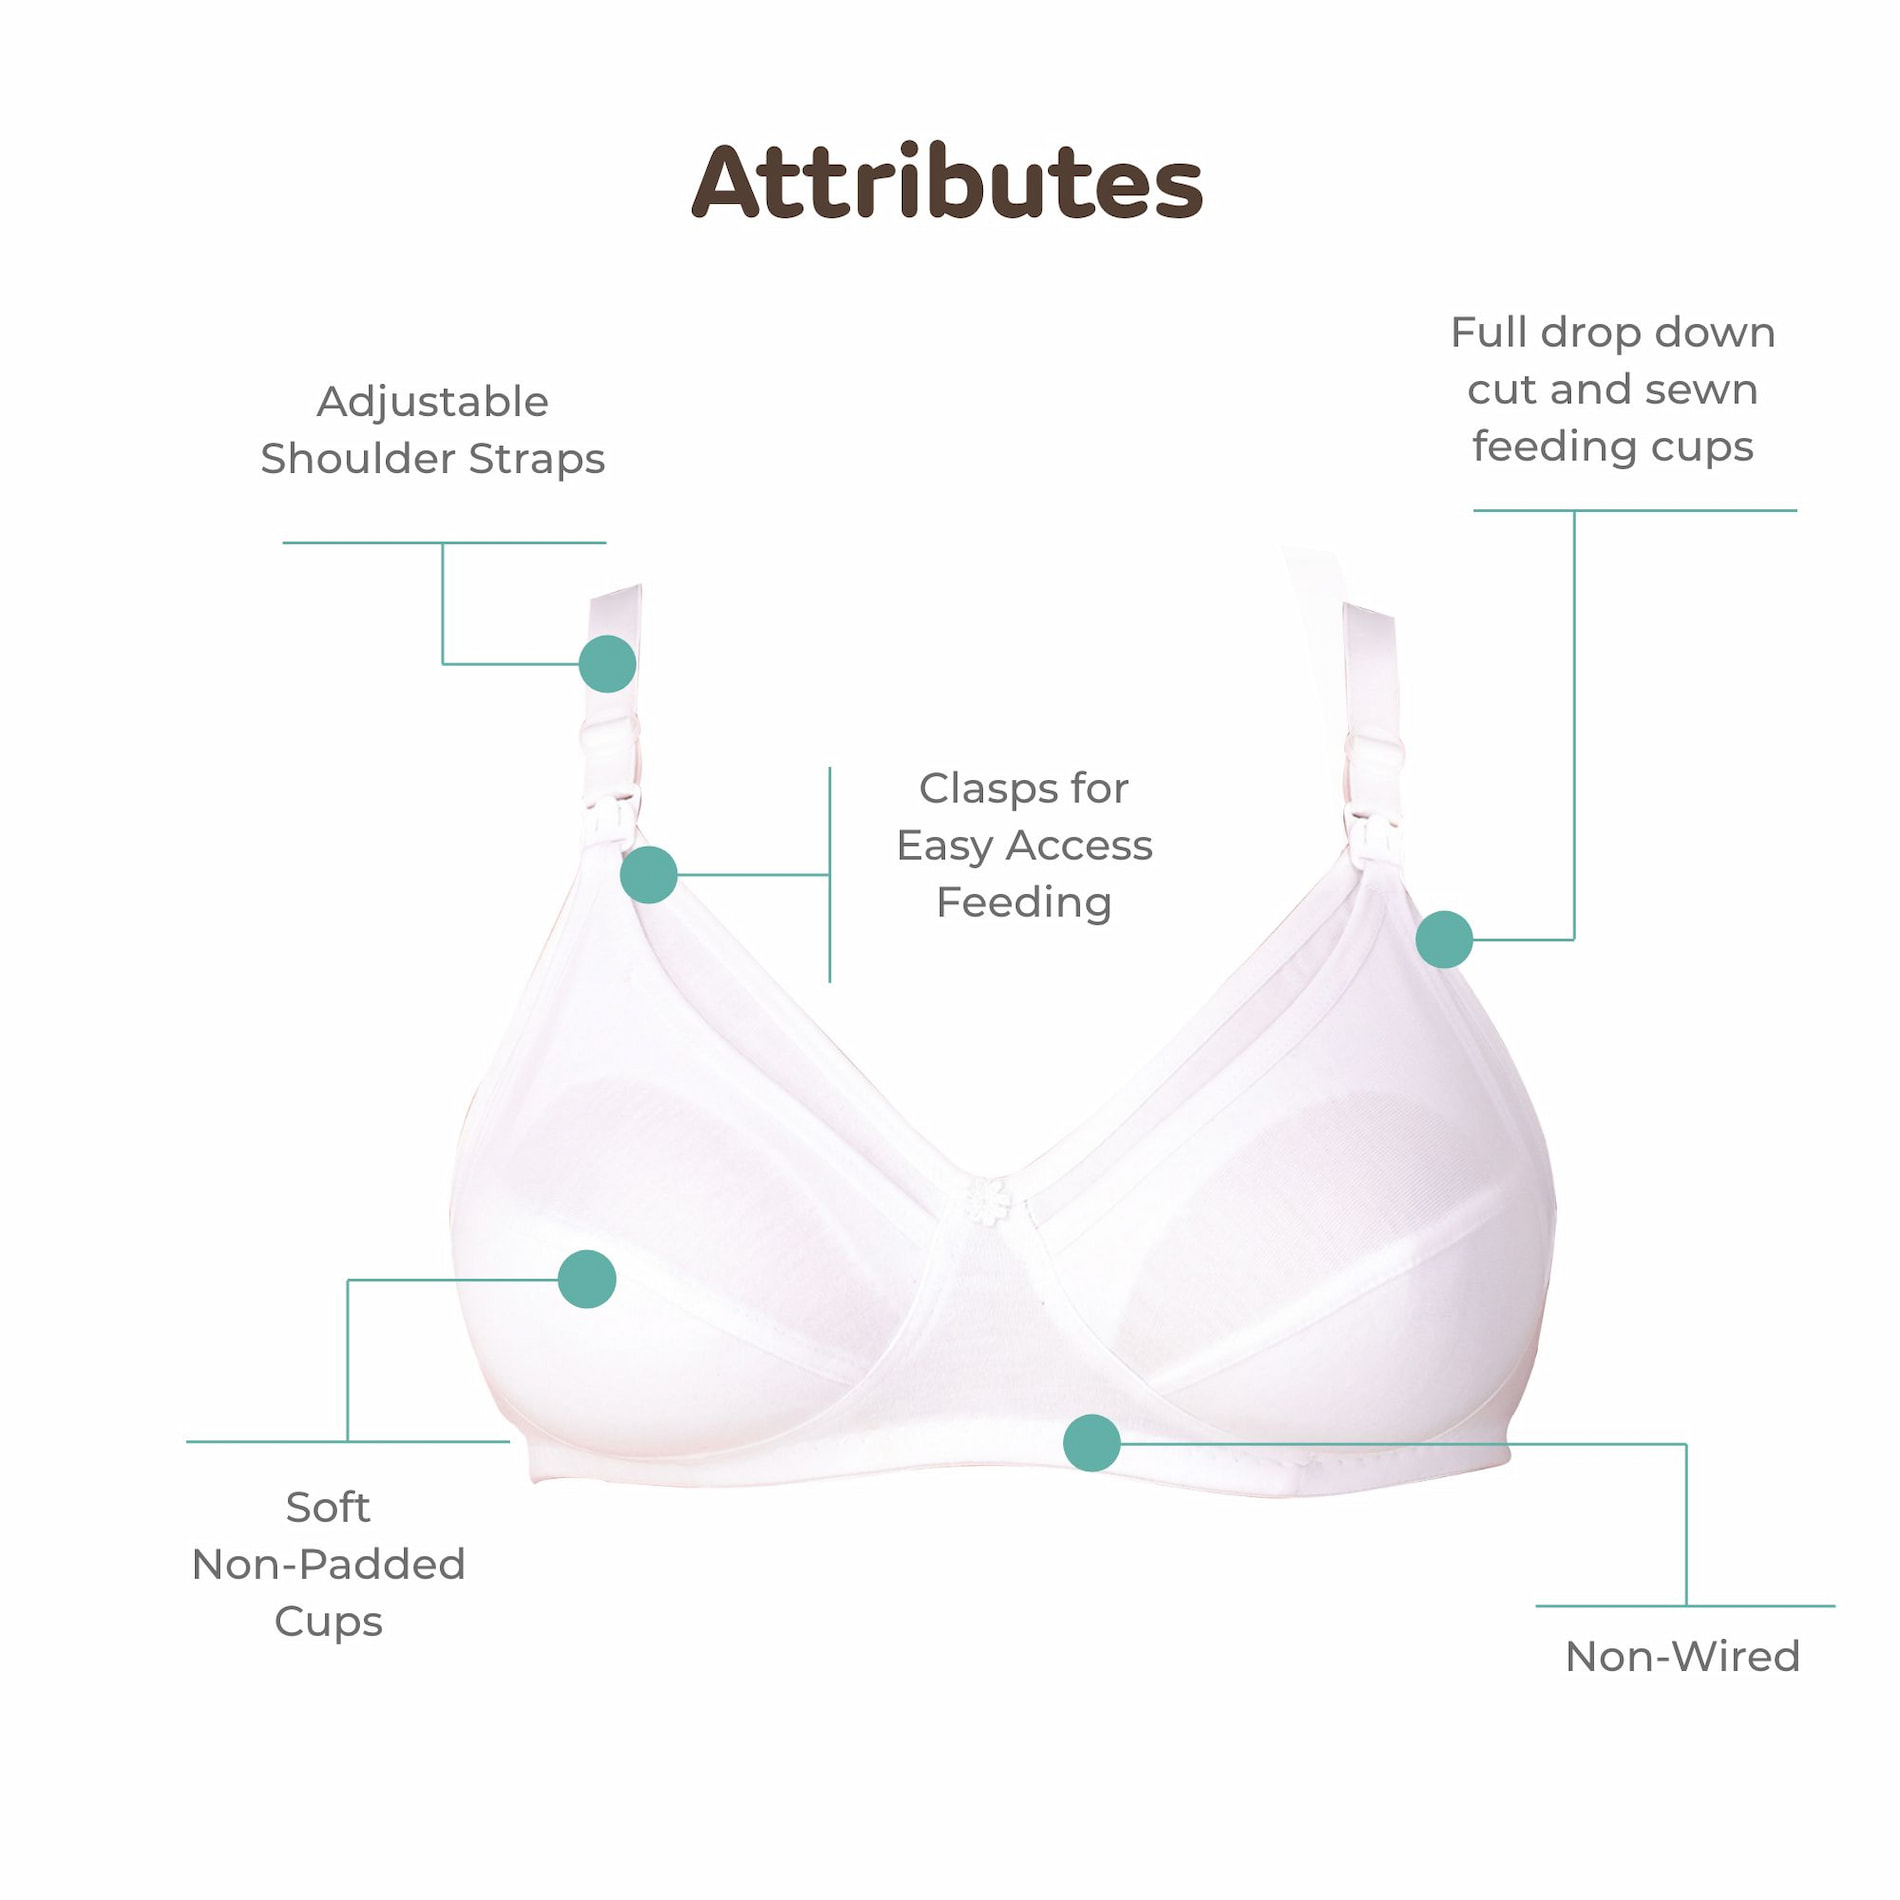 Mylo Maternity/Nursing Bras Non-Wired, Non-Padded with free Bra Extender - Classic White 42 B 